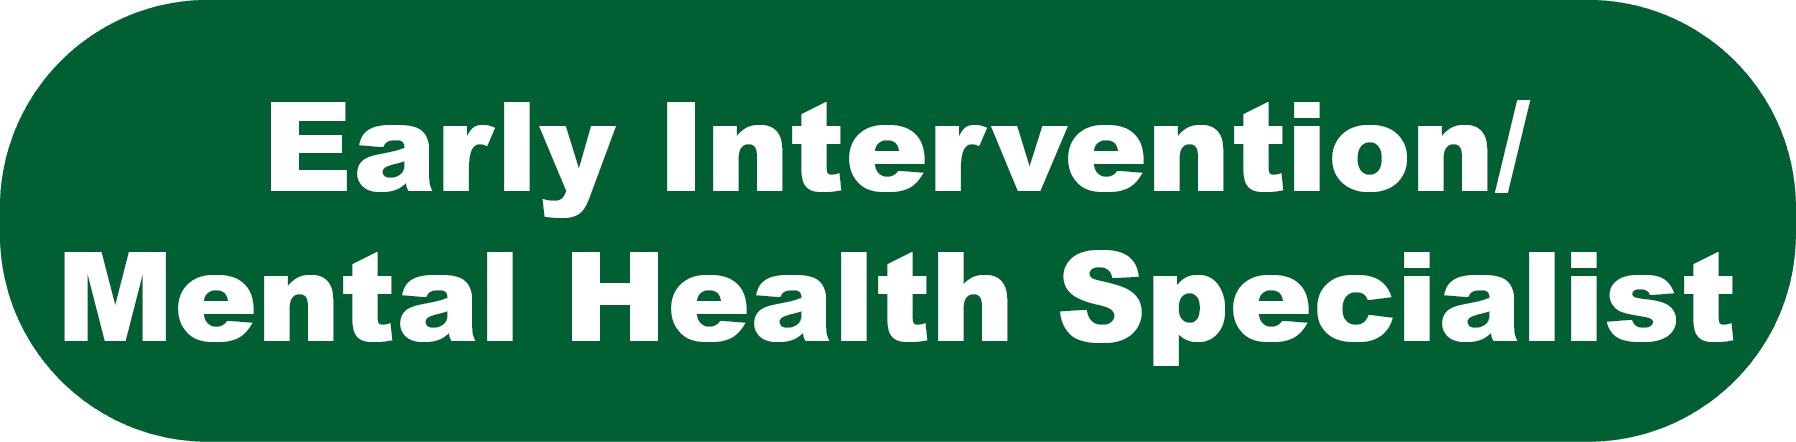 Early Intervention and Mental Health Specialist